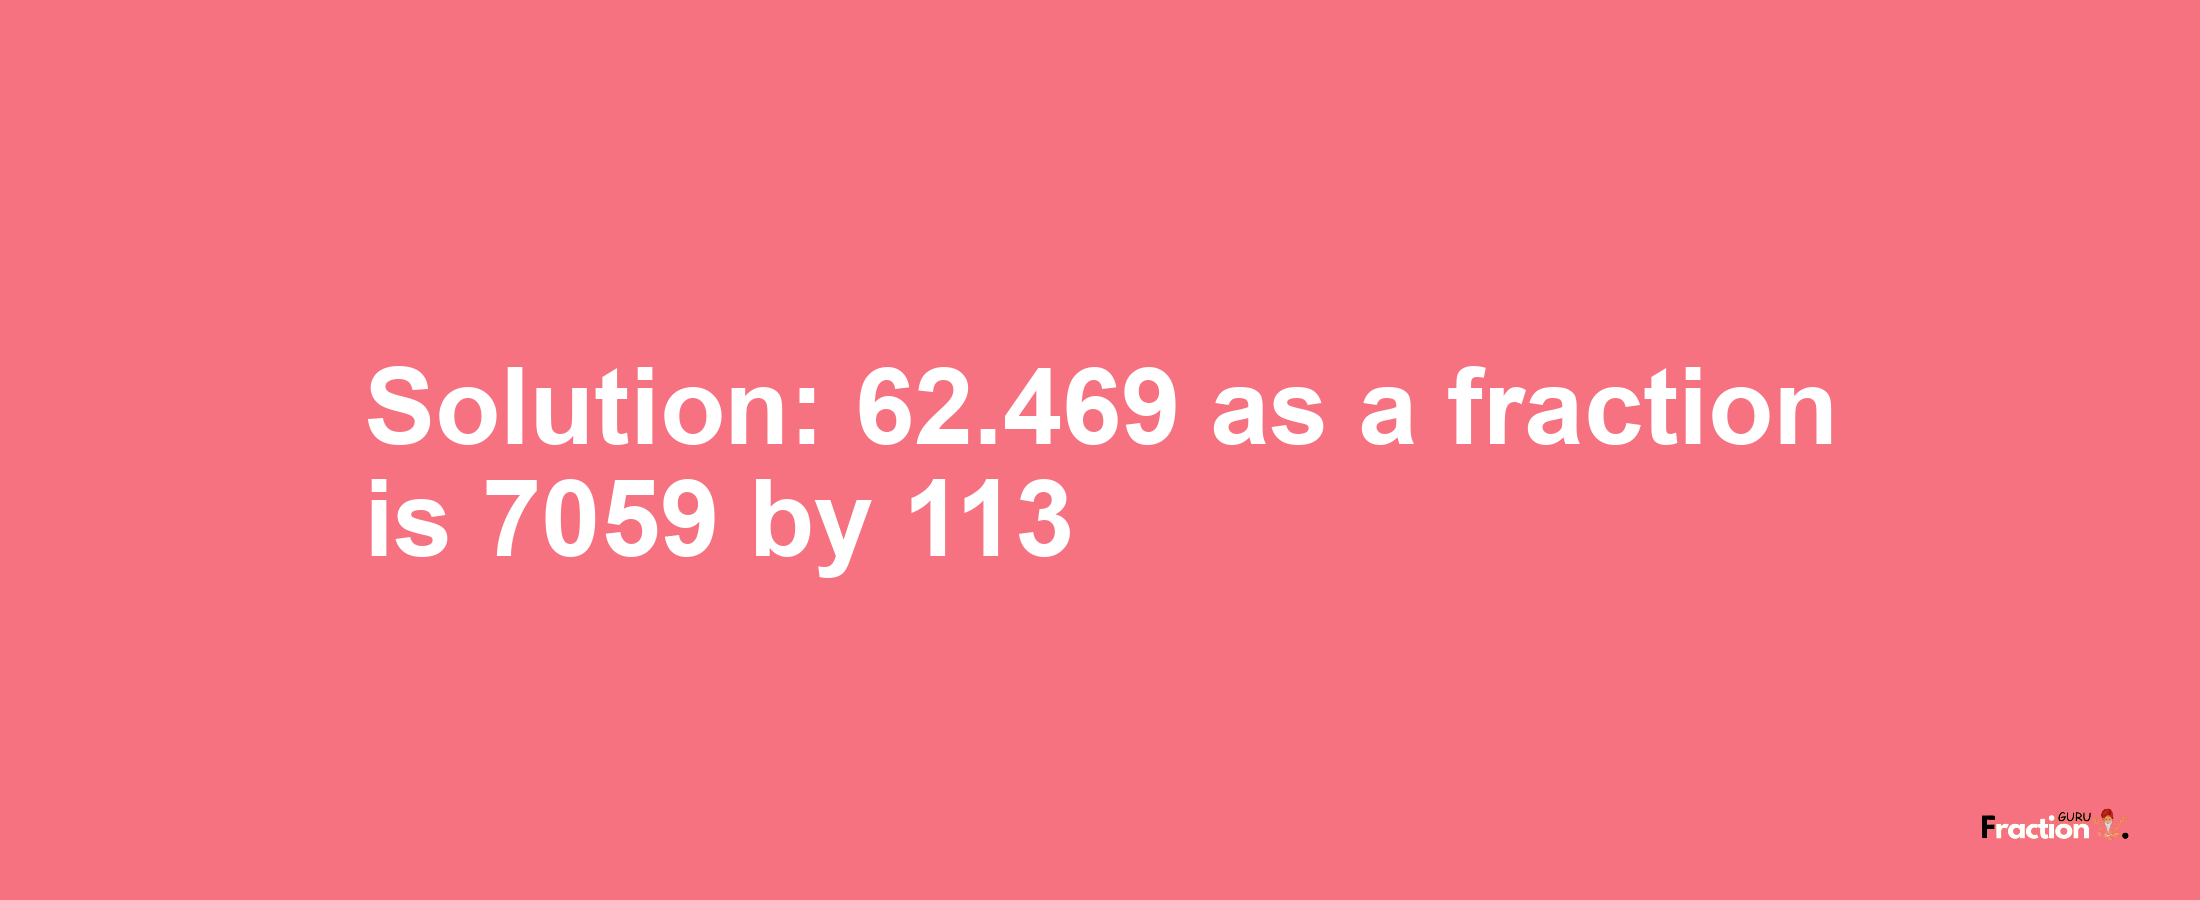 Solution:62.469 as a fraction is 7059/113